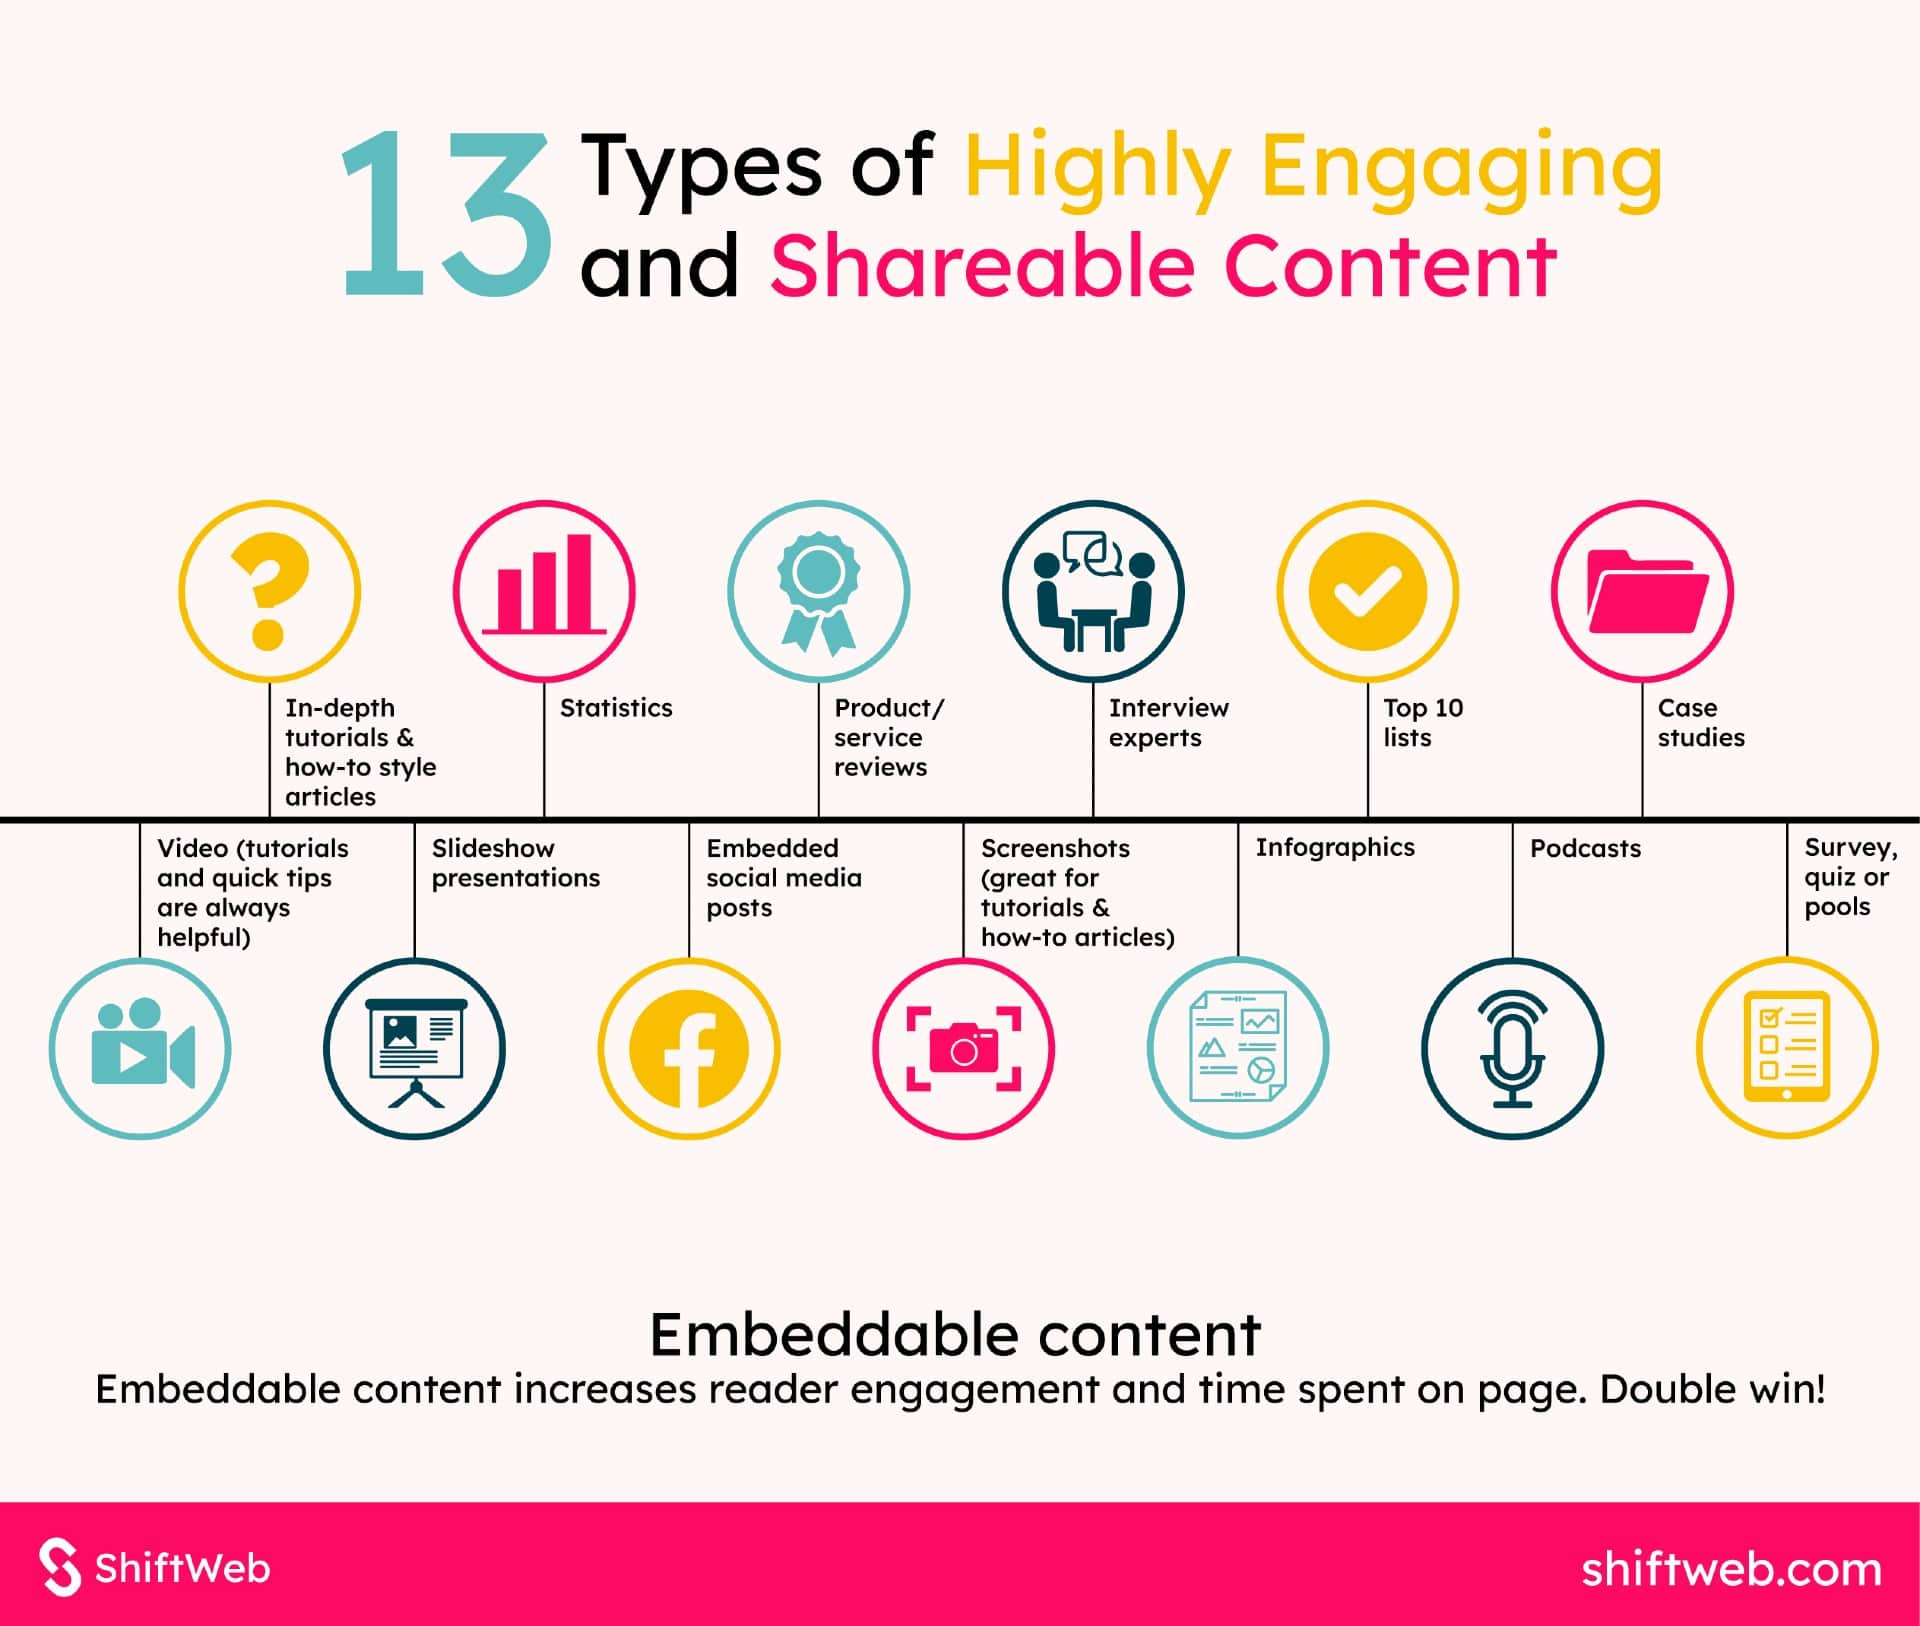 Types of Shareable Content